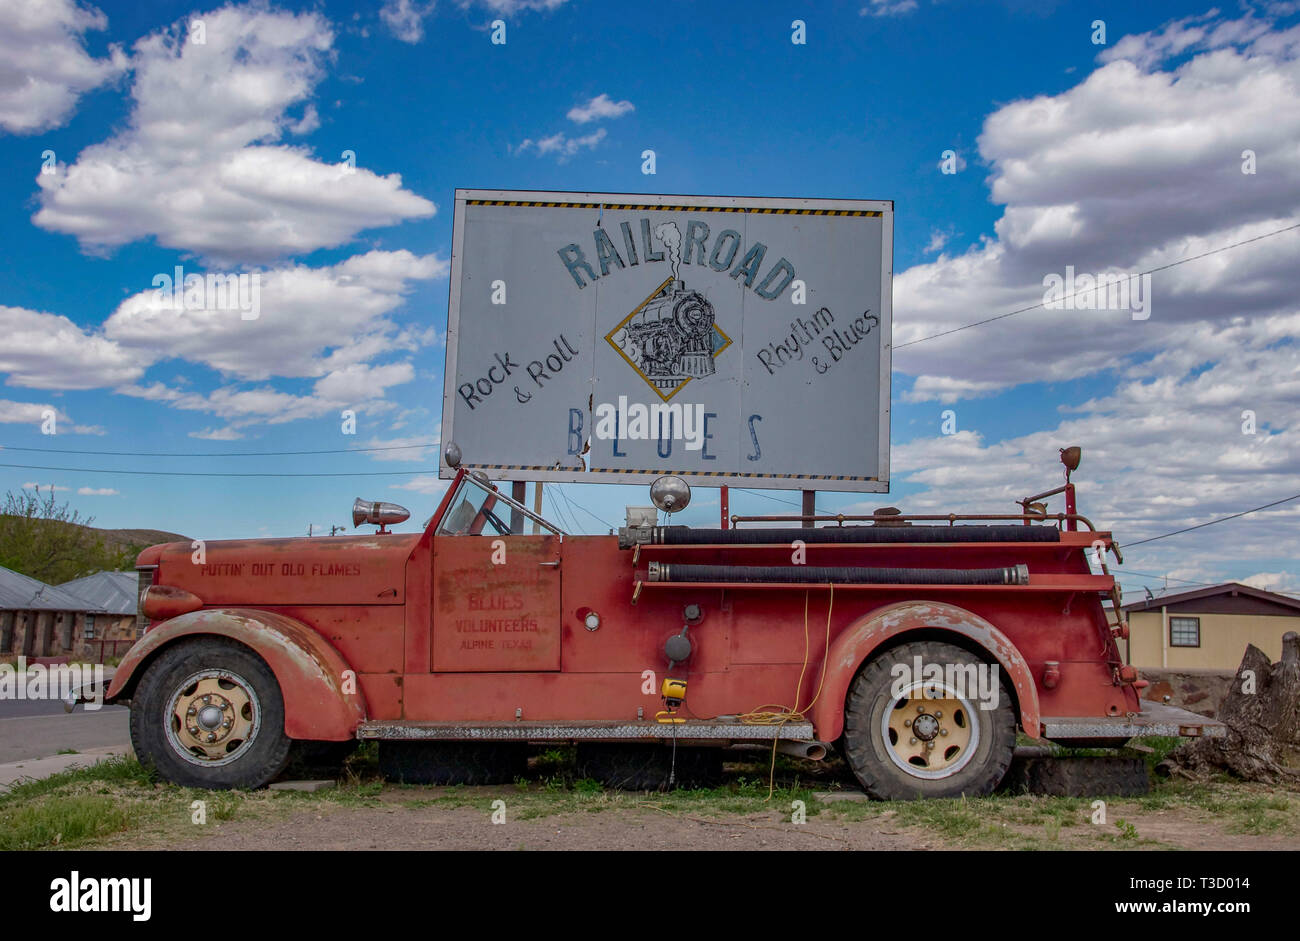 Vintage fire trcuck on display in Alpine, Texas, as a tourist attraction. Stock Photo